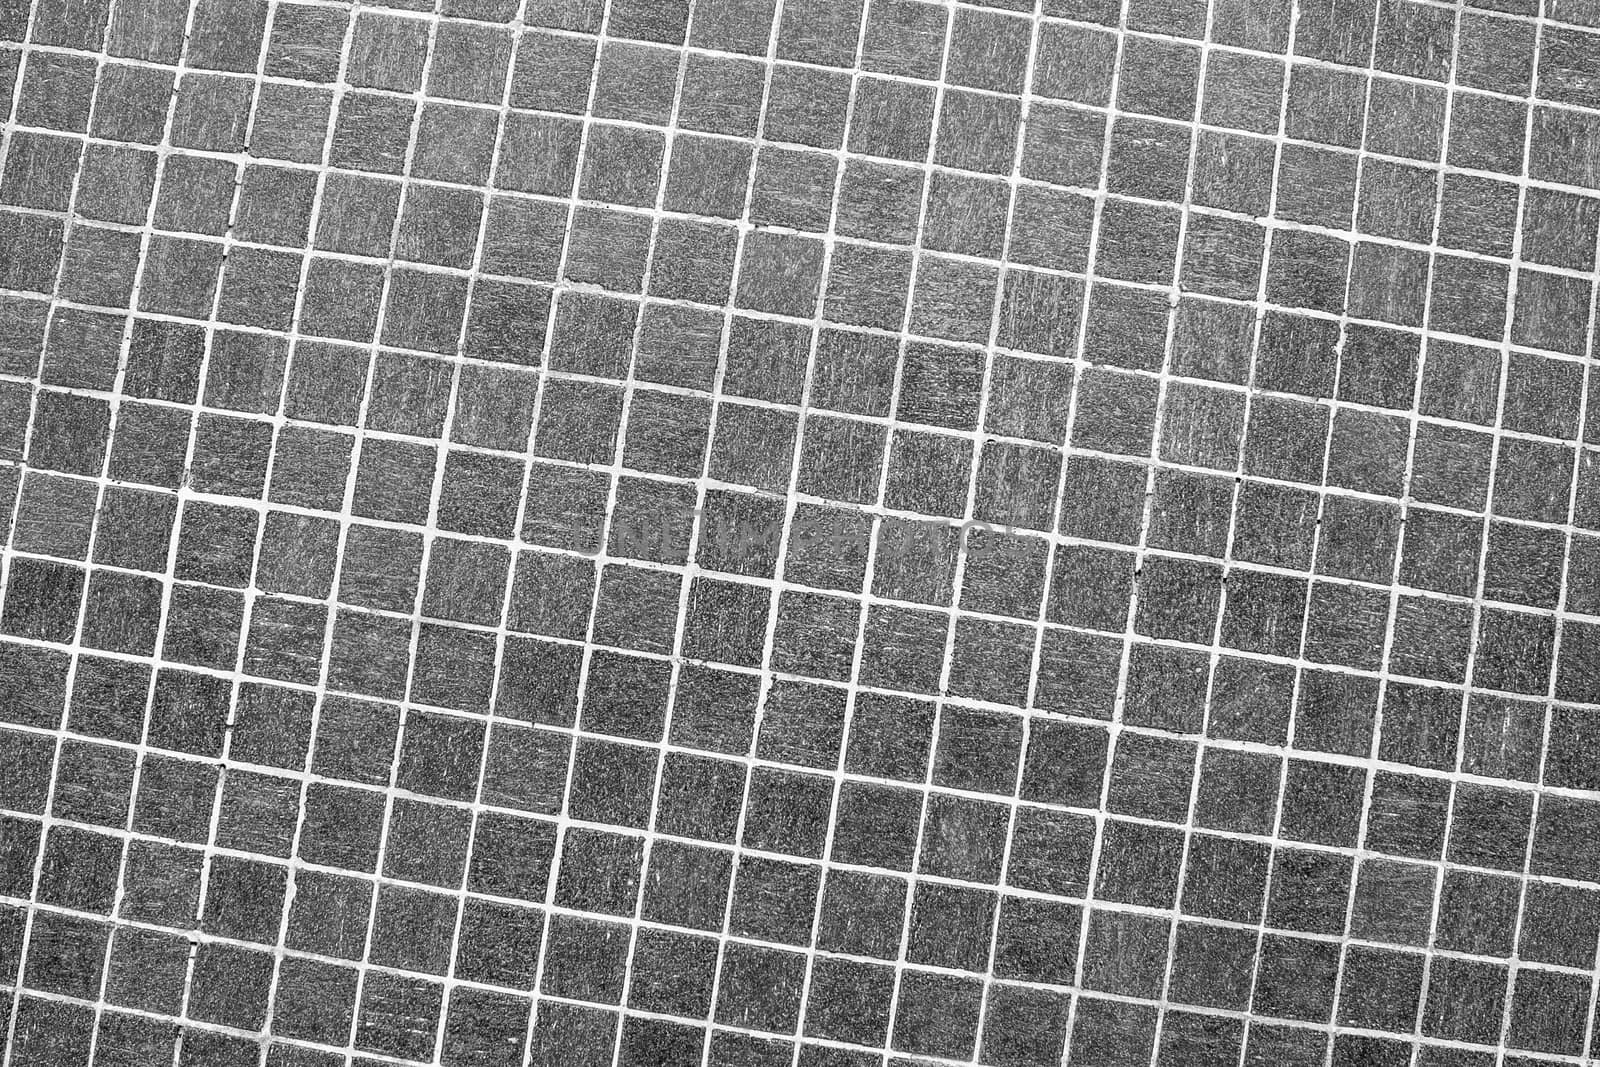 Small grey square mosaic tiles abstract background and texture.